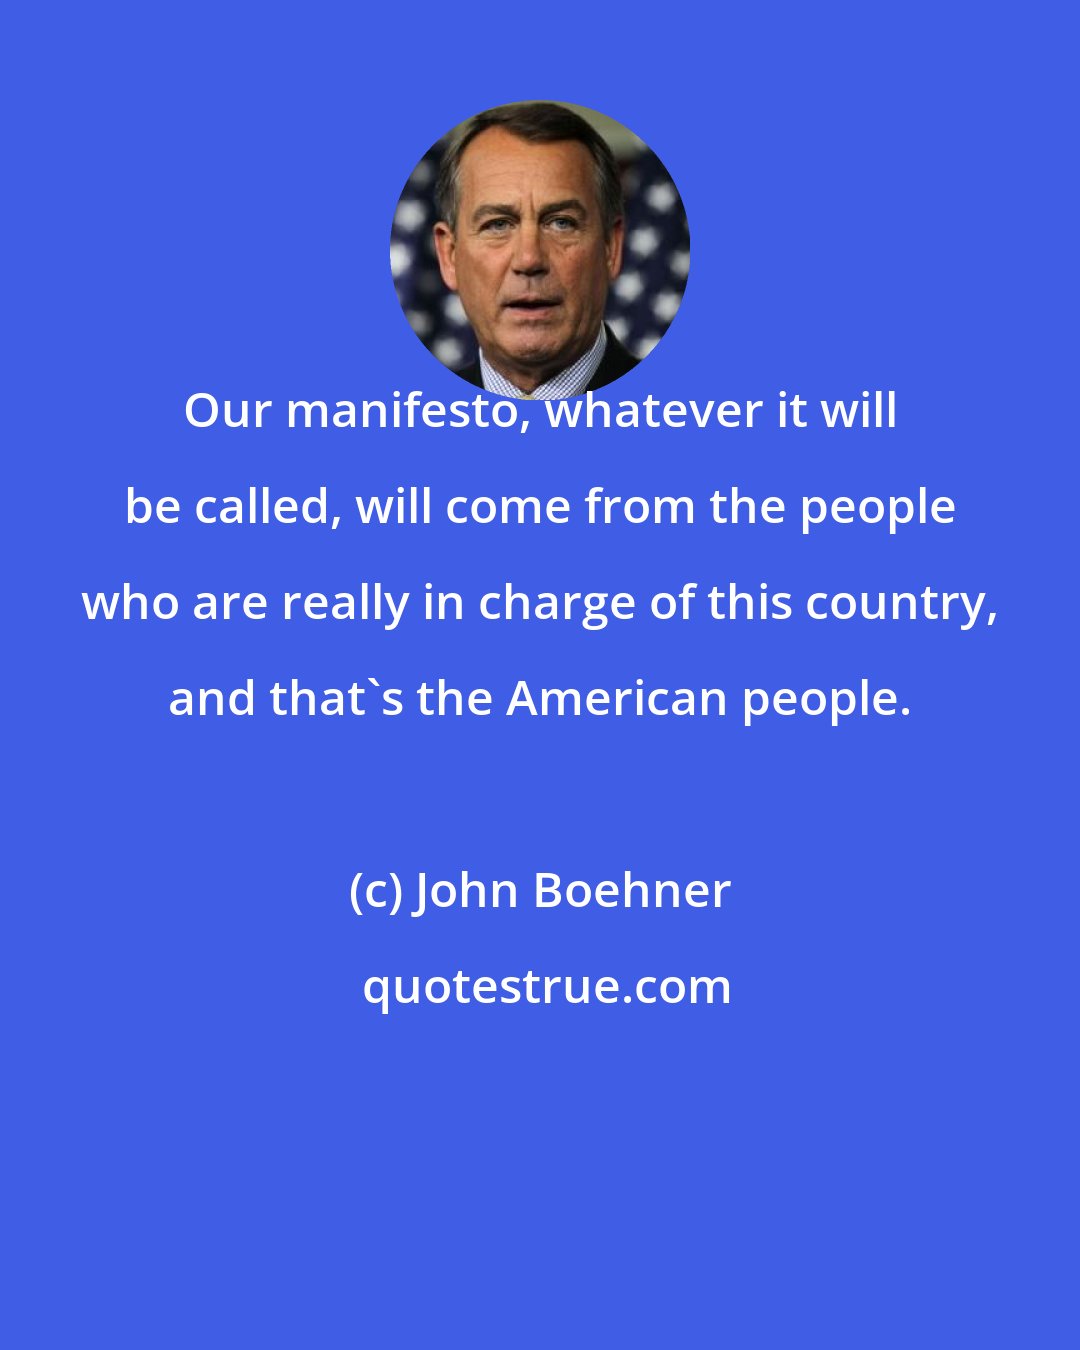 John Boehner: Our manifesto, whatever it will be called, will come from the people who are really in charge of this country, and that's the American people.